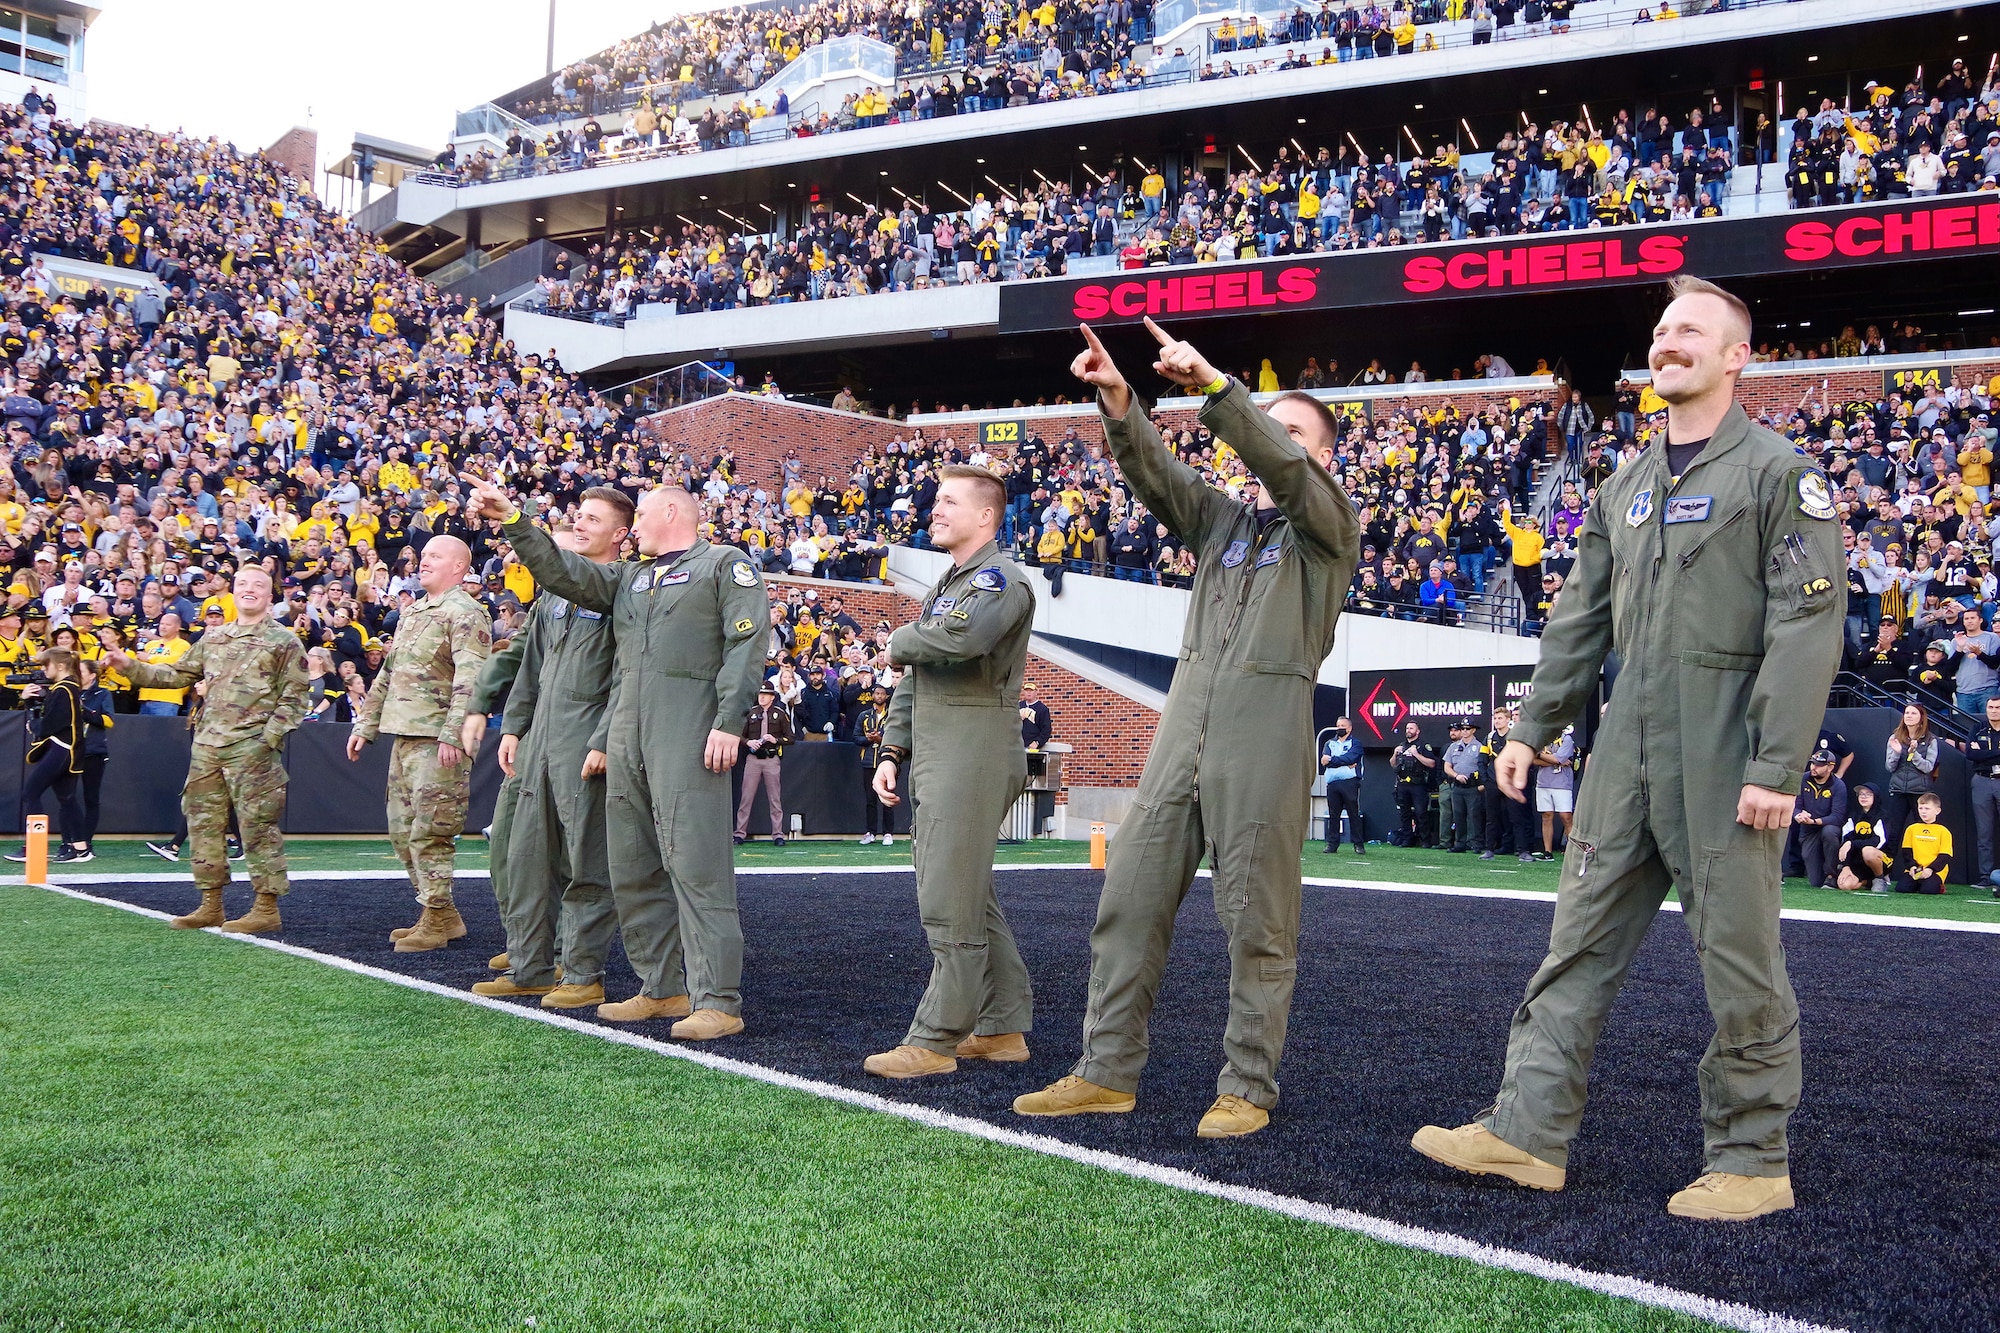 Aircrew from the 85th Air Refueling Wing are honored in the end zone at Kinnick Stadium in Iowa City, Iowa on Oct. 16 ,2021.